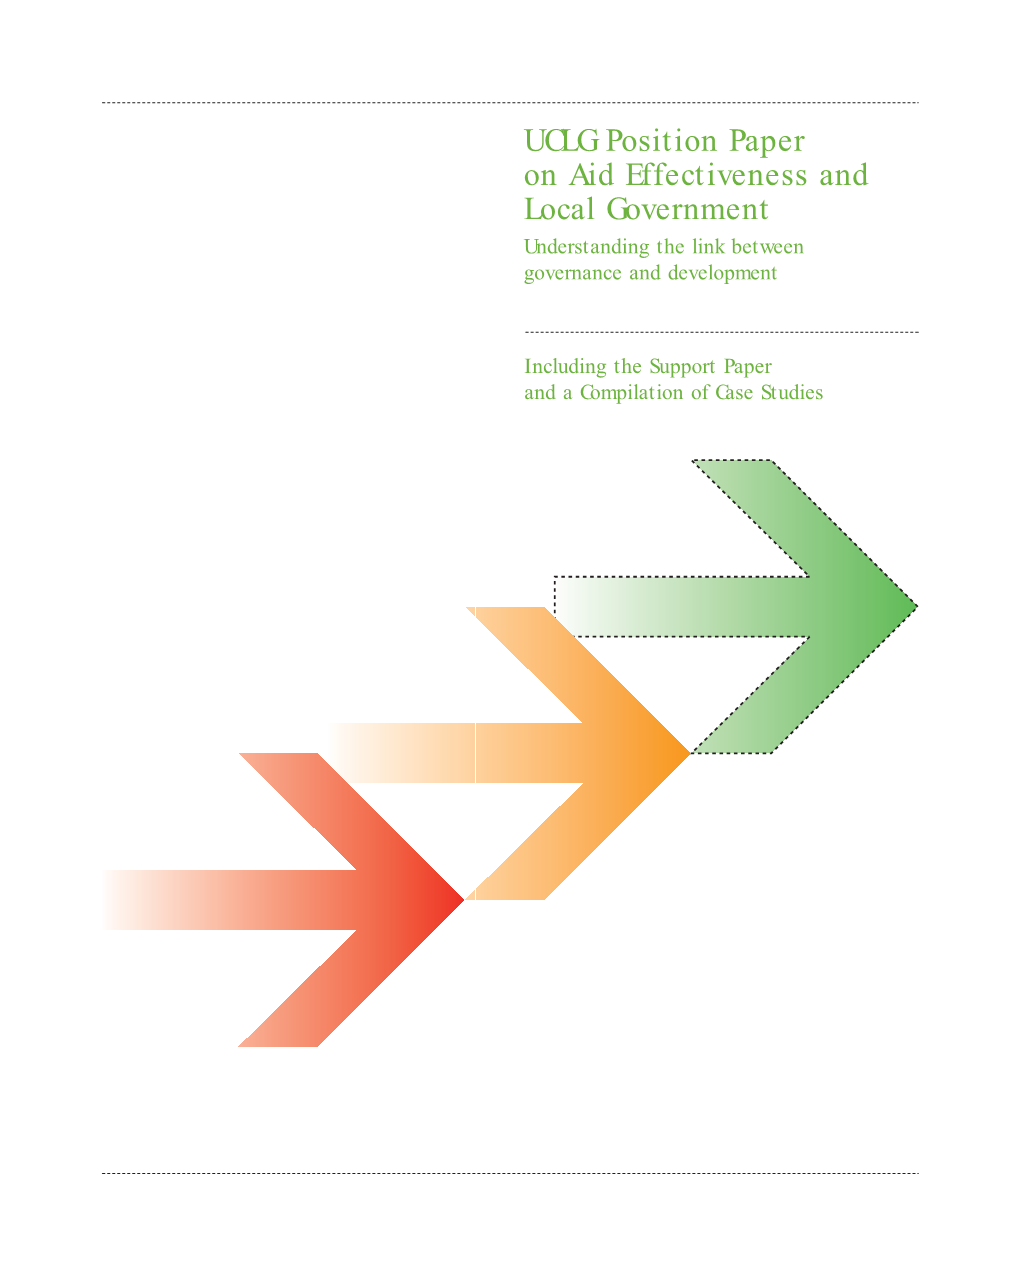 UCLG Position Paper on Aid Effectiveness and Local Government Understanding the Link Between Governance and Development